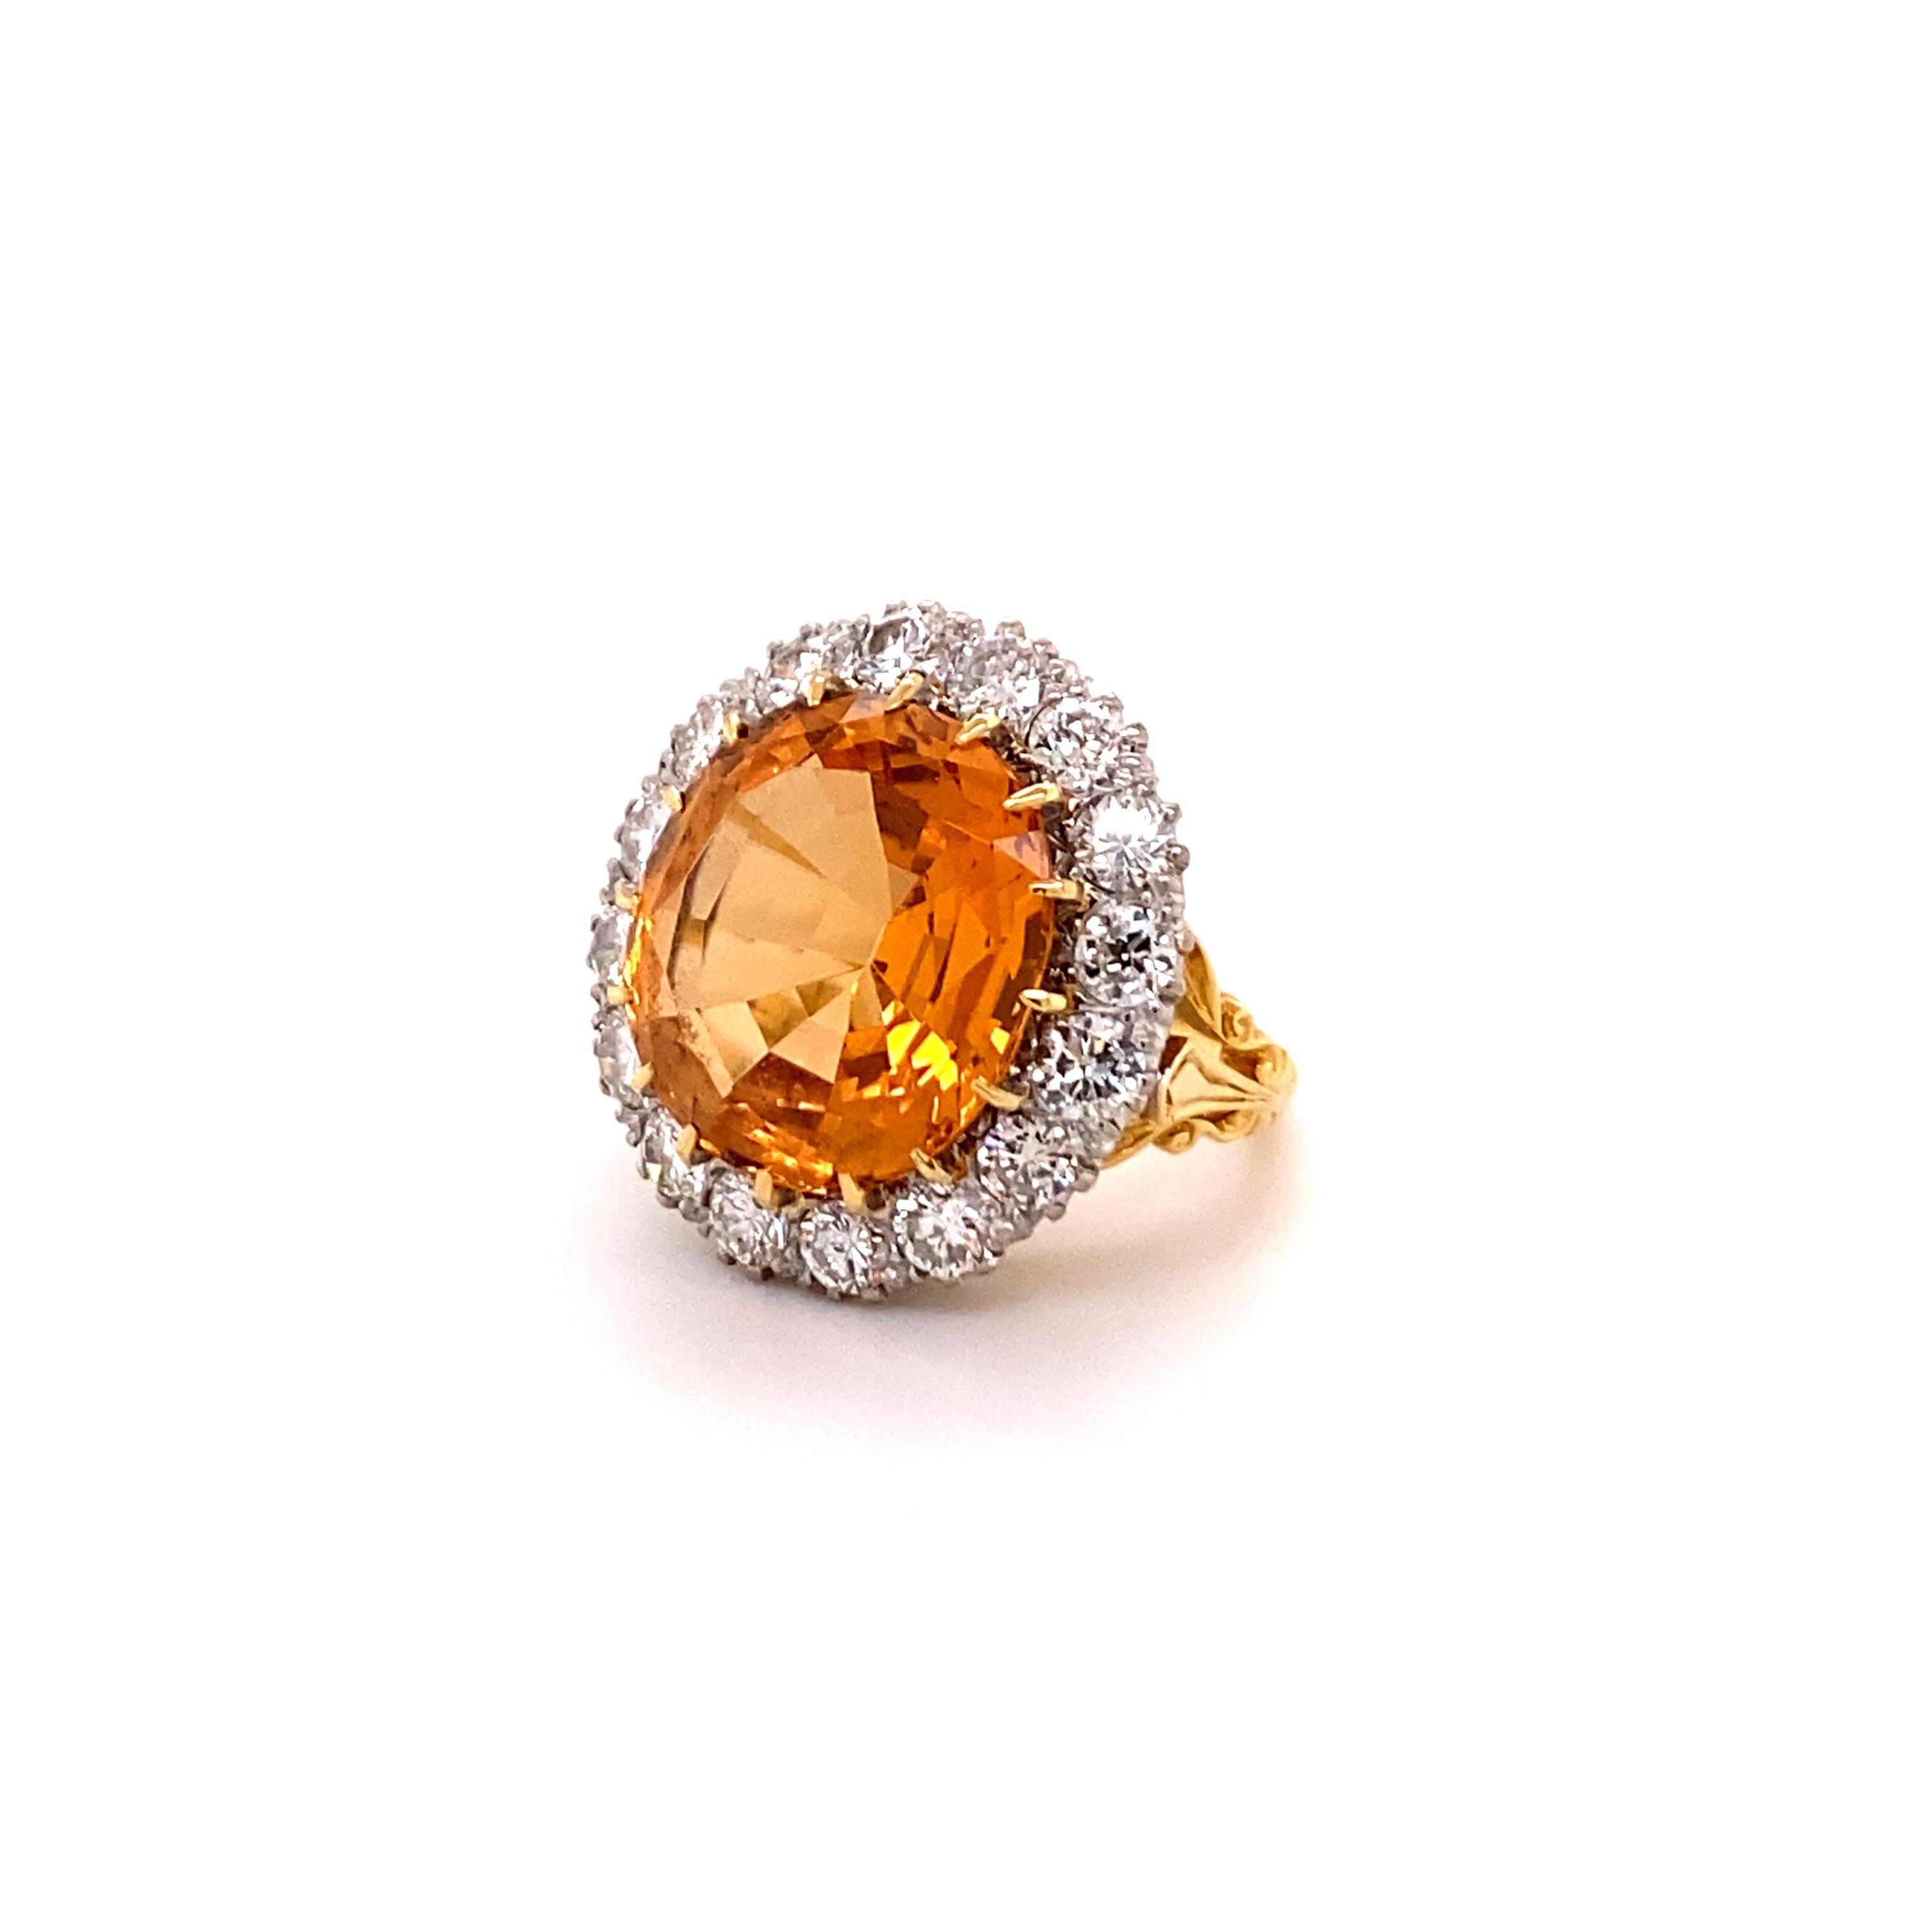 This sparkling cocktail ring features a cushion-shaped imperial topaz of approximately 14.00 carats. Surrounded by an impressive entourage of 16 brilliant-cut diamonds of G/H colour and si clarity, total weight approximately 2.40 carats.
The setting